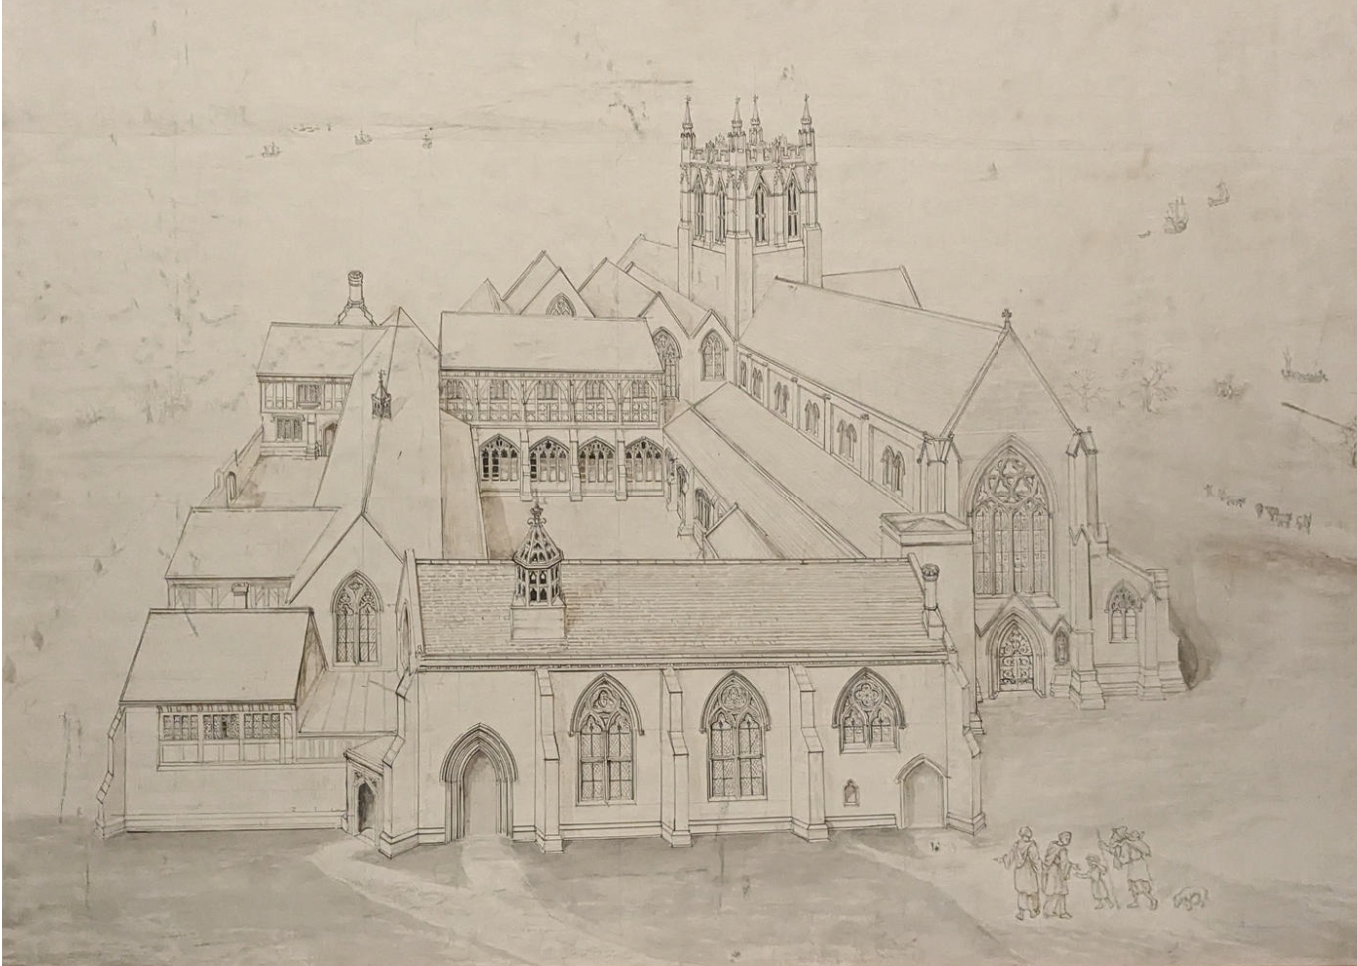 Drawing of an imagined Birkenhead Priory site if it were fully restored/ what it would have looked like.